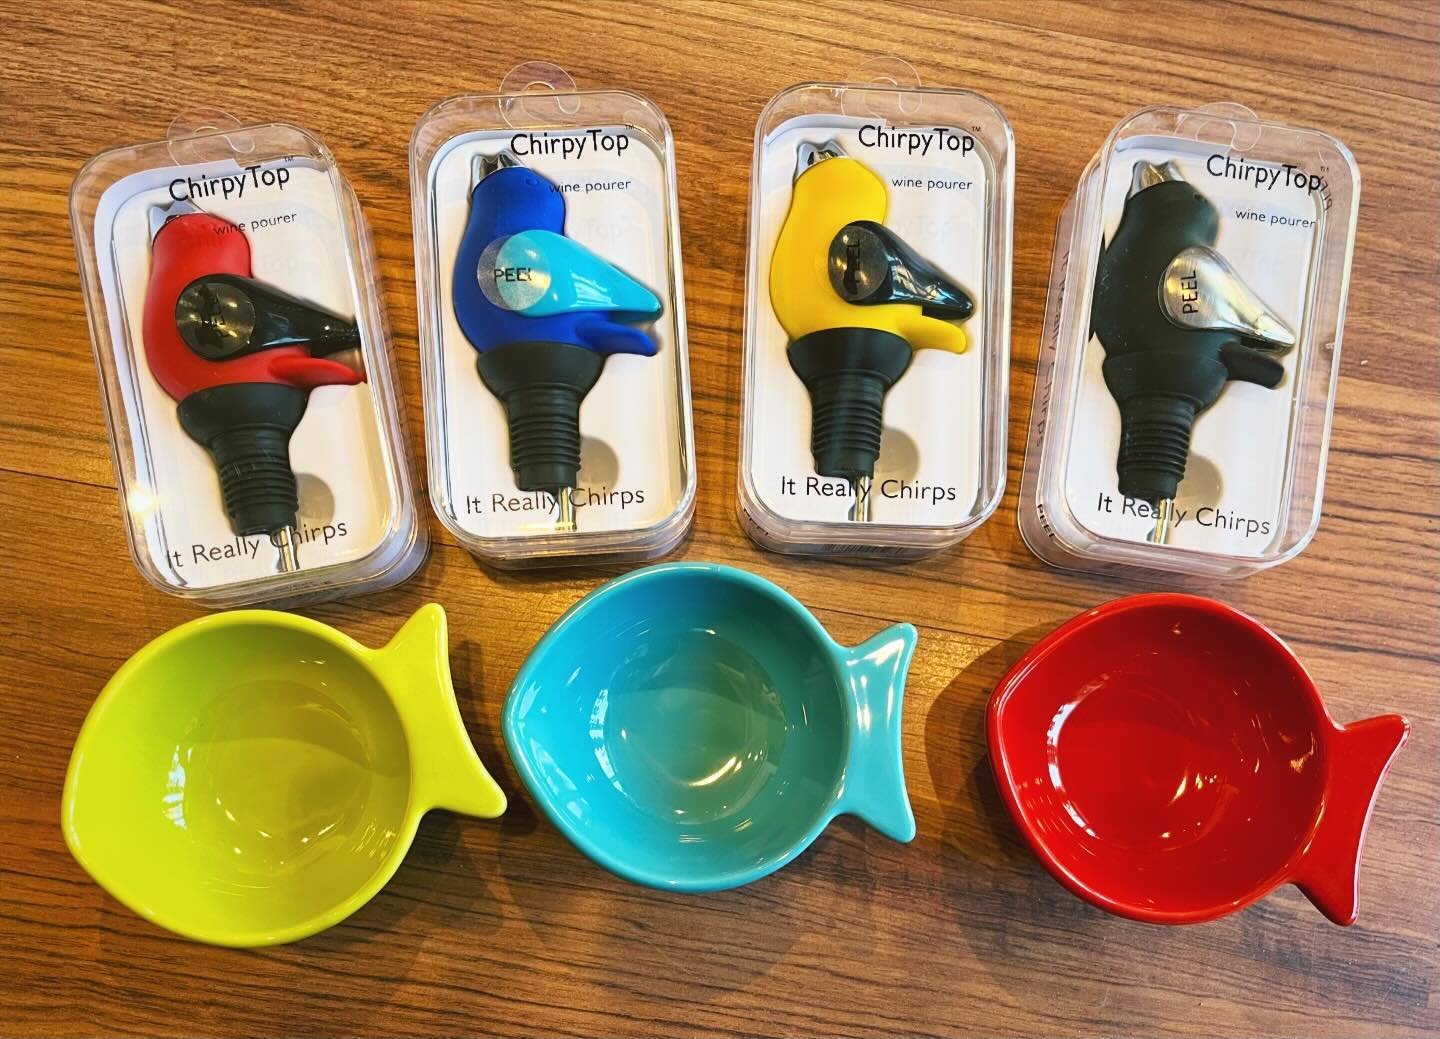 If you love our Gurgle Pots, you will love these Chirpy Top wine pourers! #newarrivals #chirpytop #winepourer #fun #shoplocal #theresnoplacelikehome #downtowndurango #durango #colorado